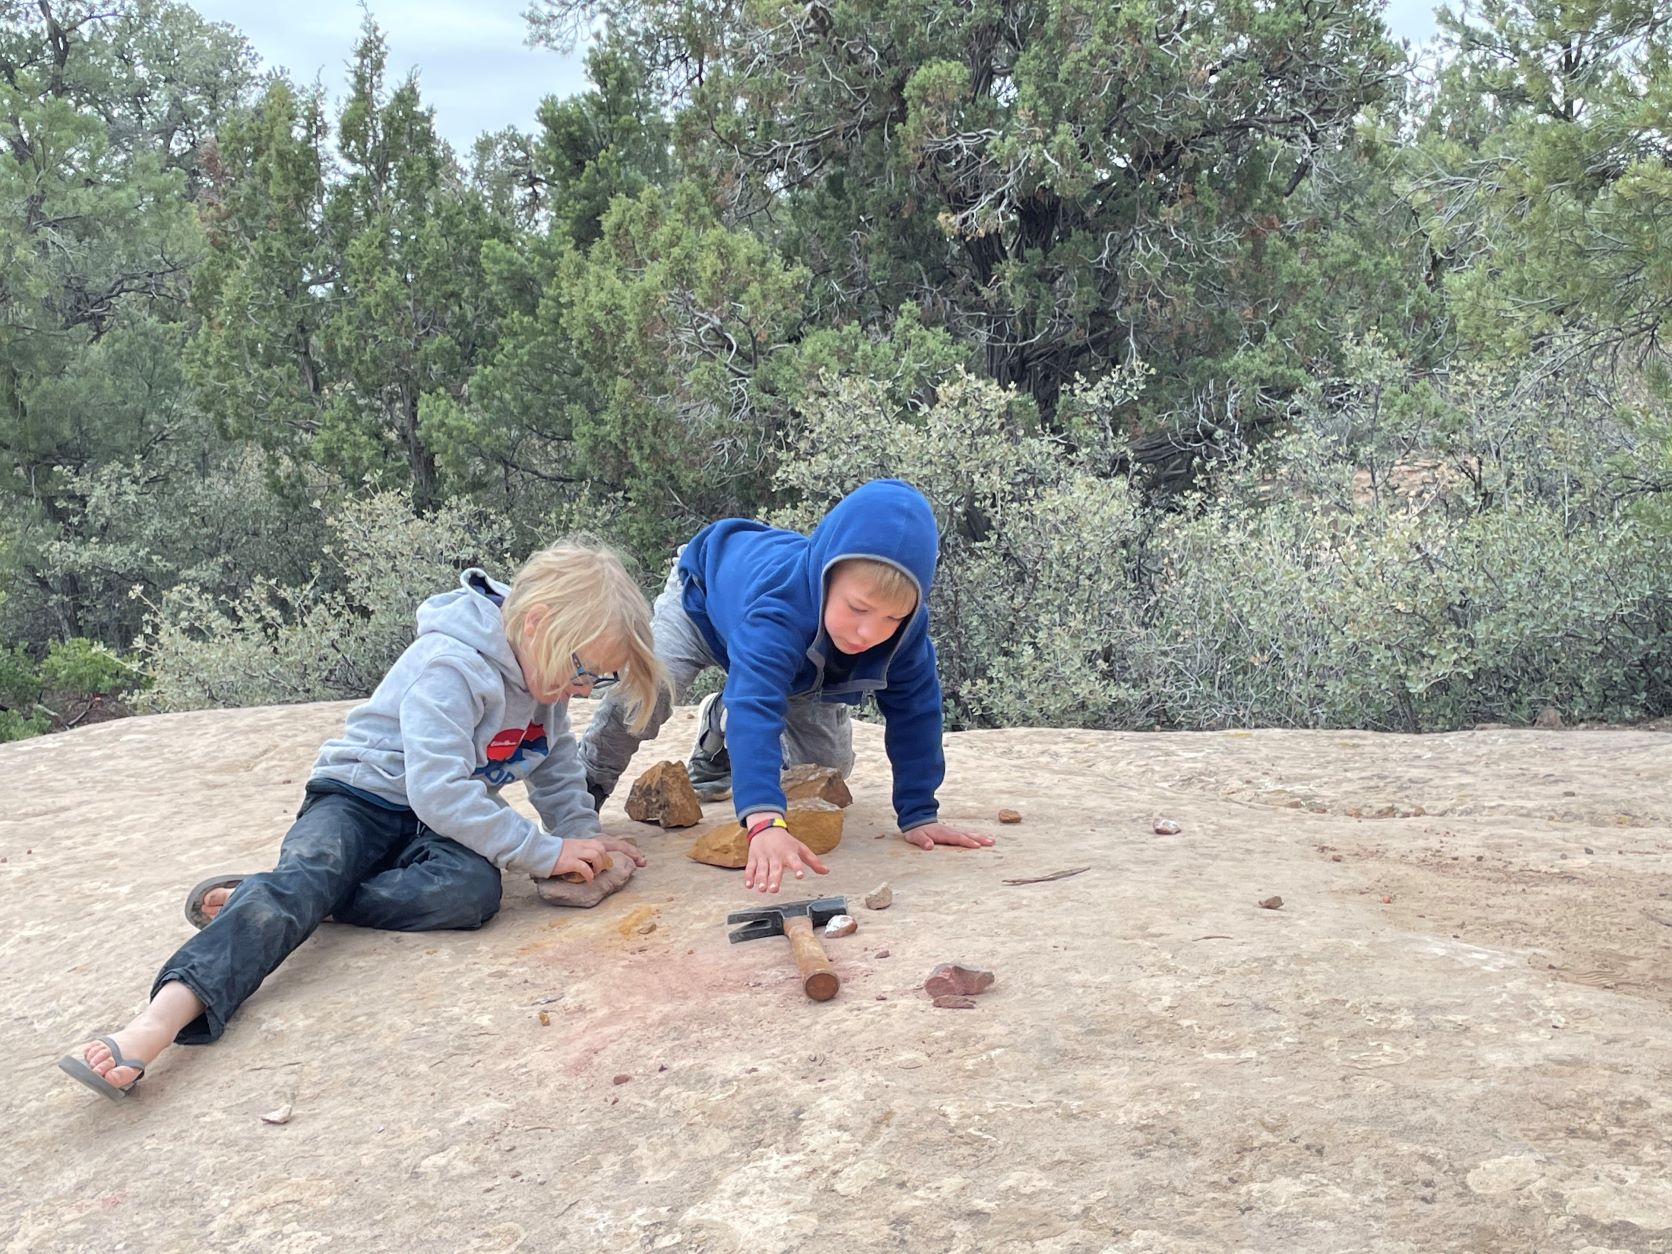 Two children laying down on a huge boulder examining a collection of rocks, with a hammer to break open rocks and explore the insides.on of small rocks and examining them.